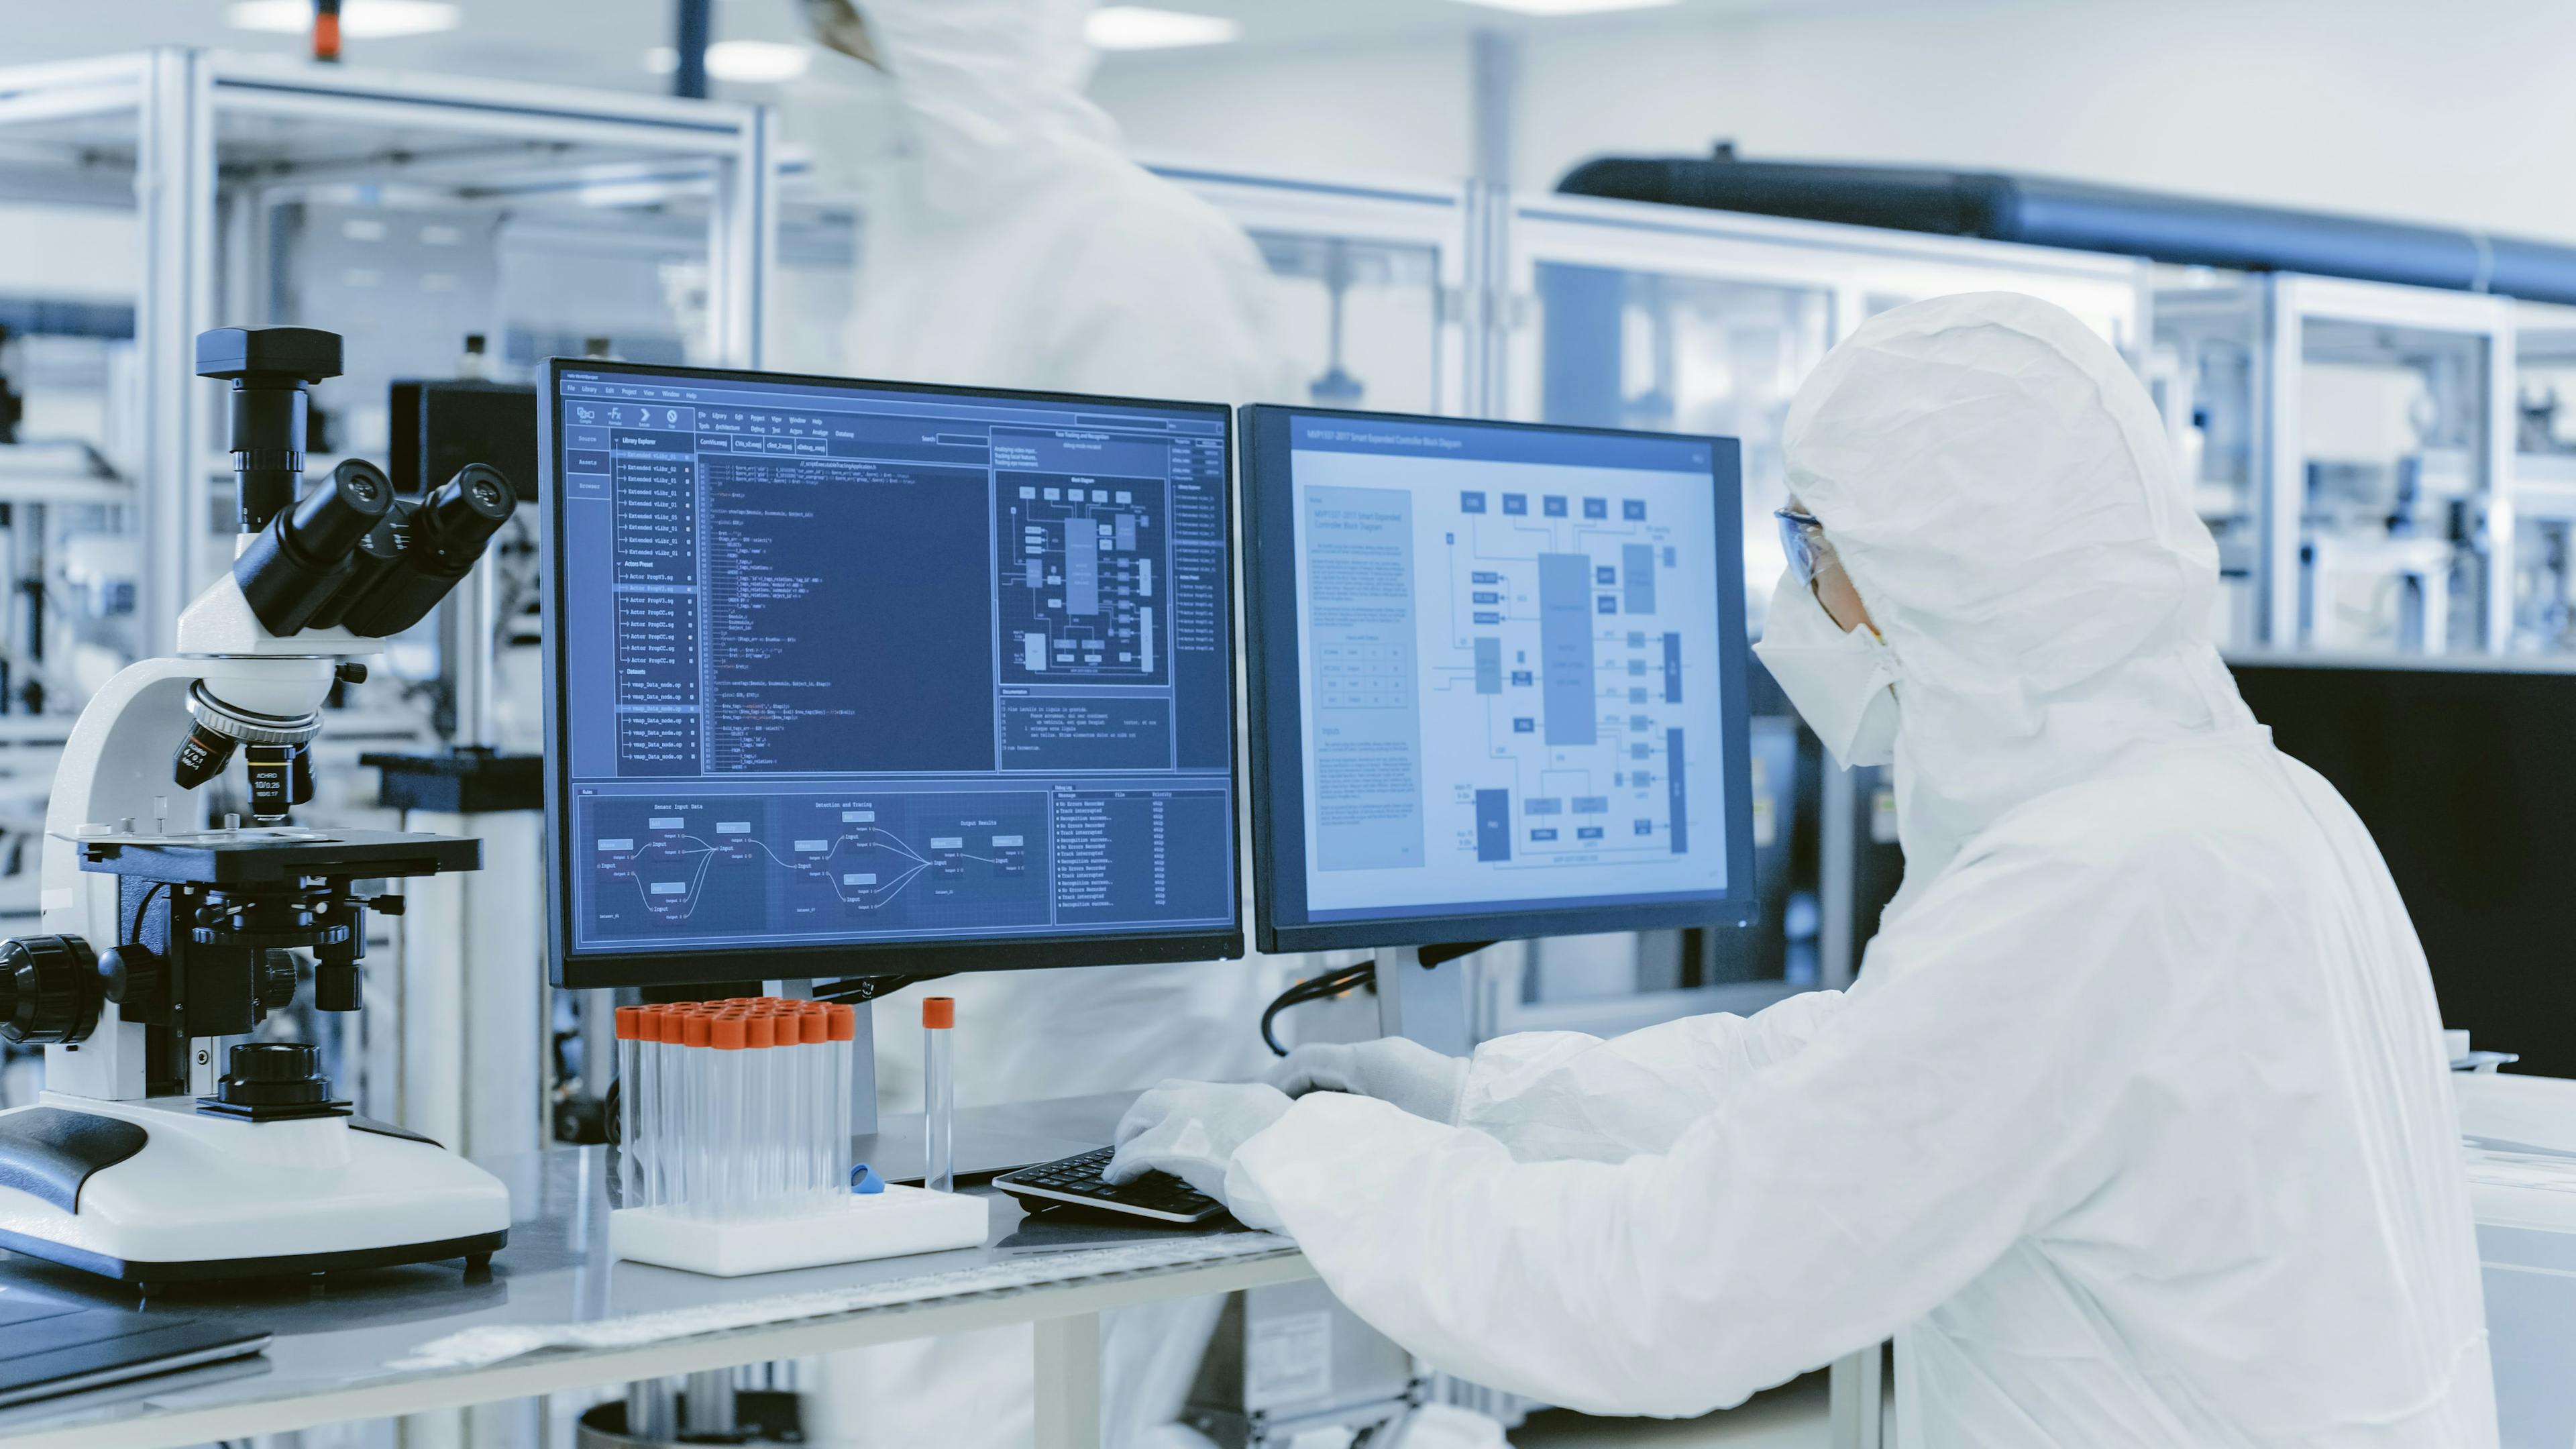 In Laboratory Over the Shoulder View of Scientist in Protective Clothes Doing Research on a Personal Computer. Modern Manufactory Producing Semiconductors and Pharmaceutical Items. Image Credit: Adobe Stock Images/Gorodenkoff